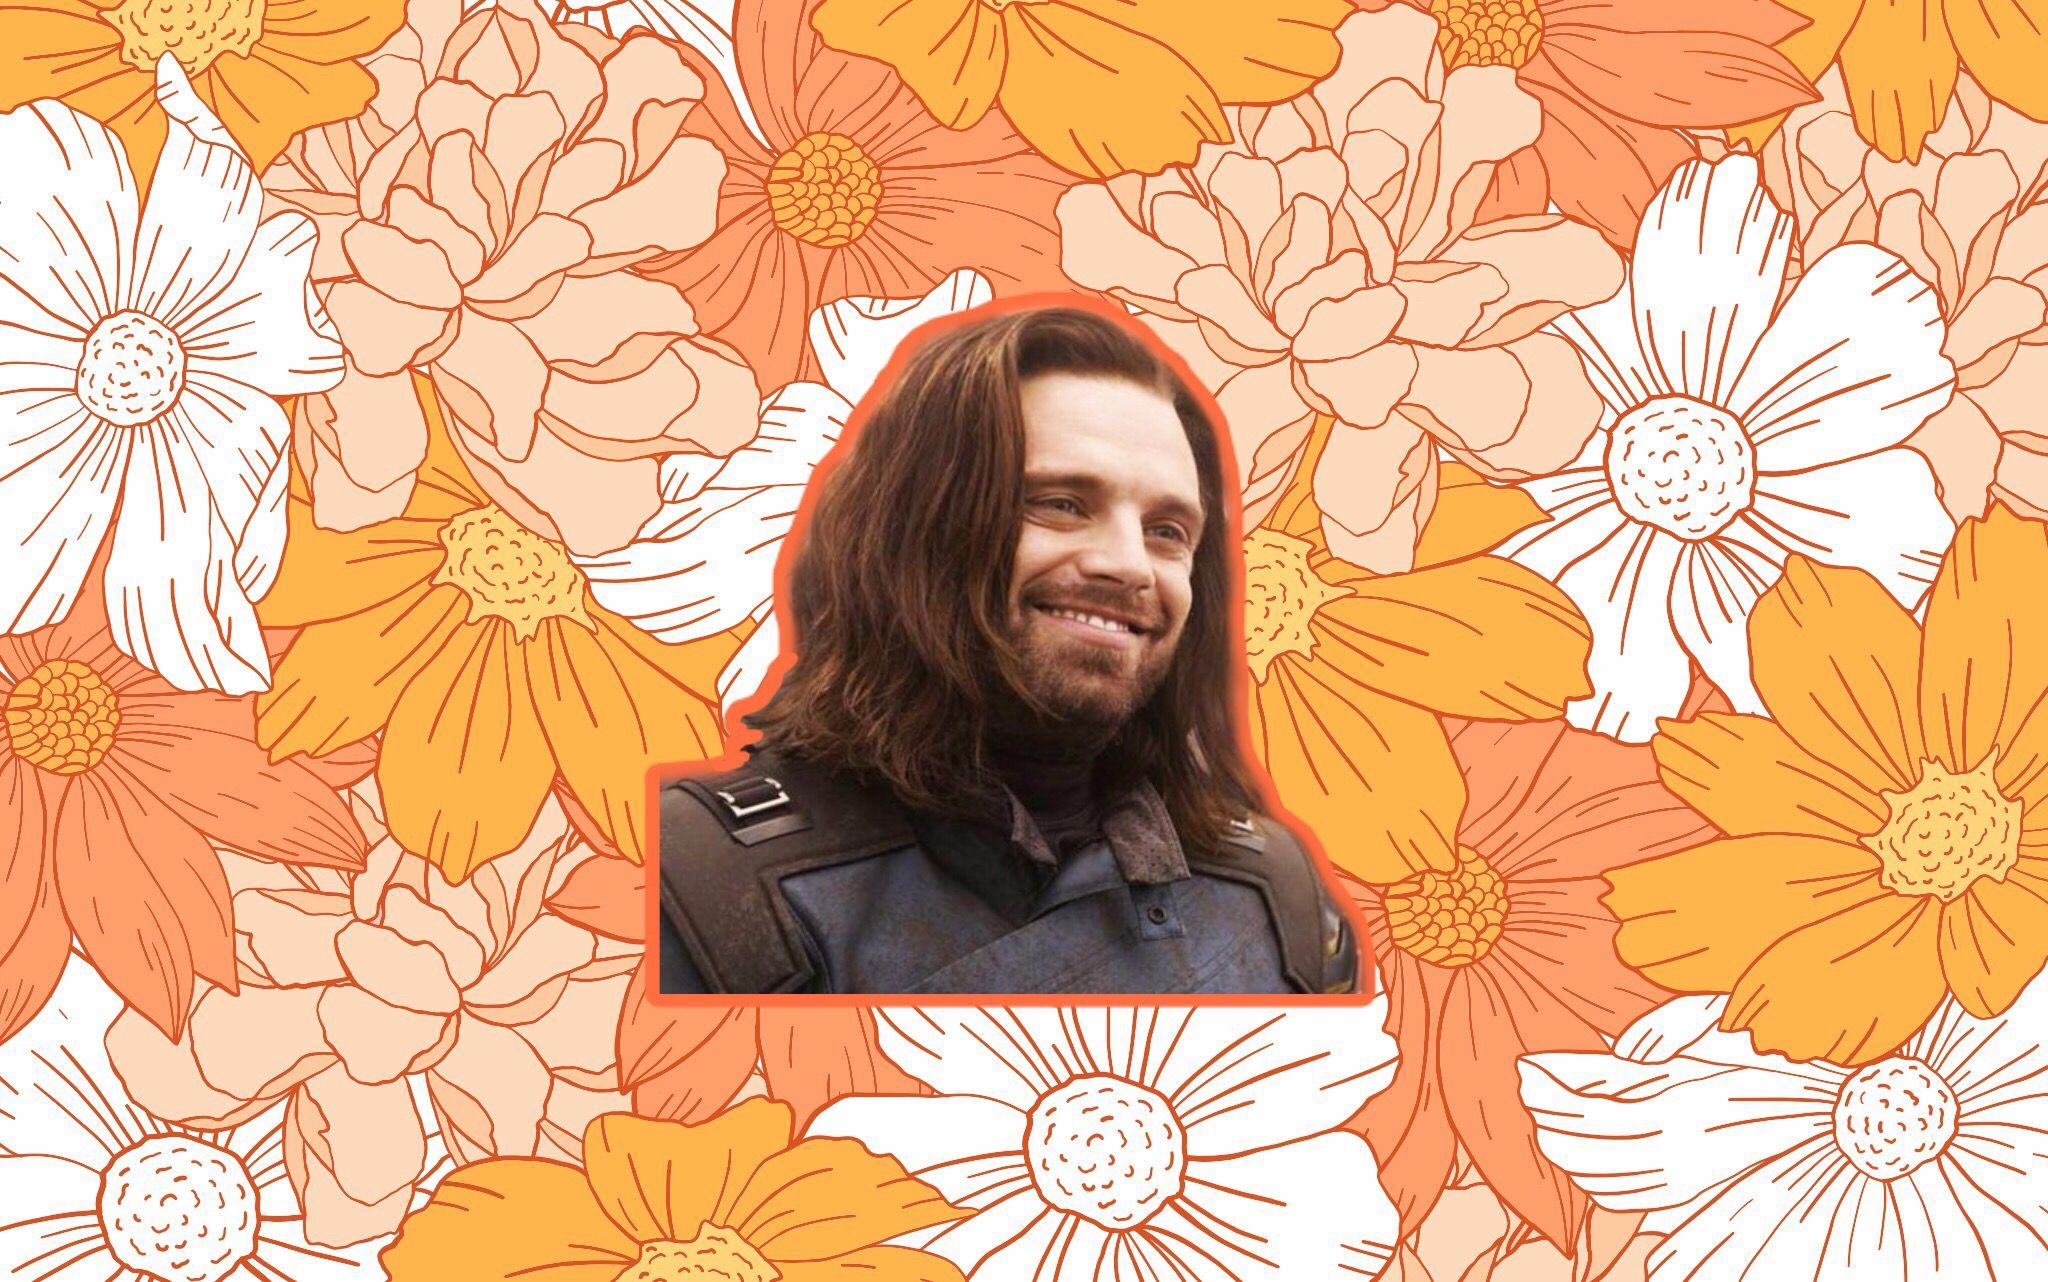 A man with long hair smiling in front of flowers - Marvel, Avengers